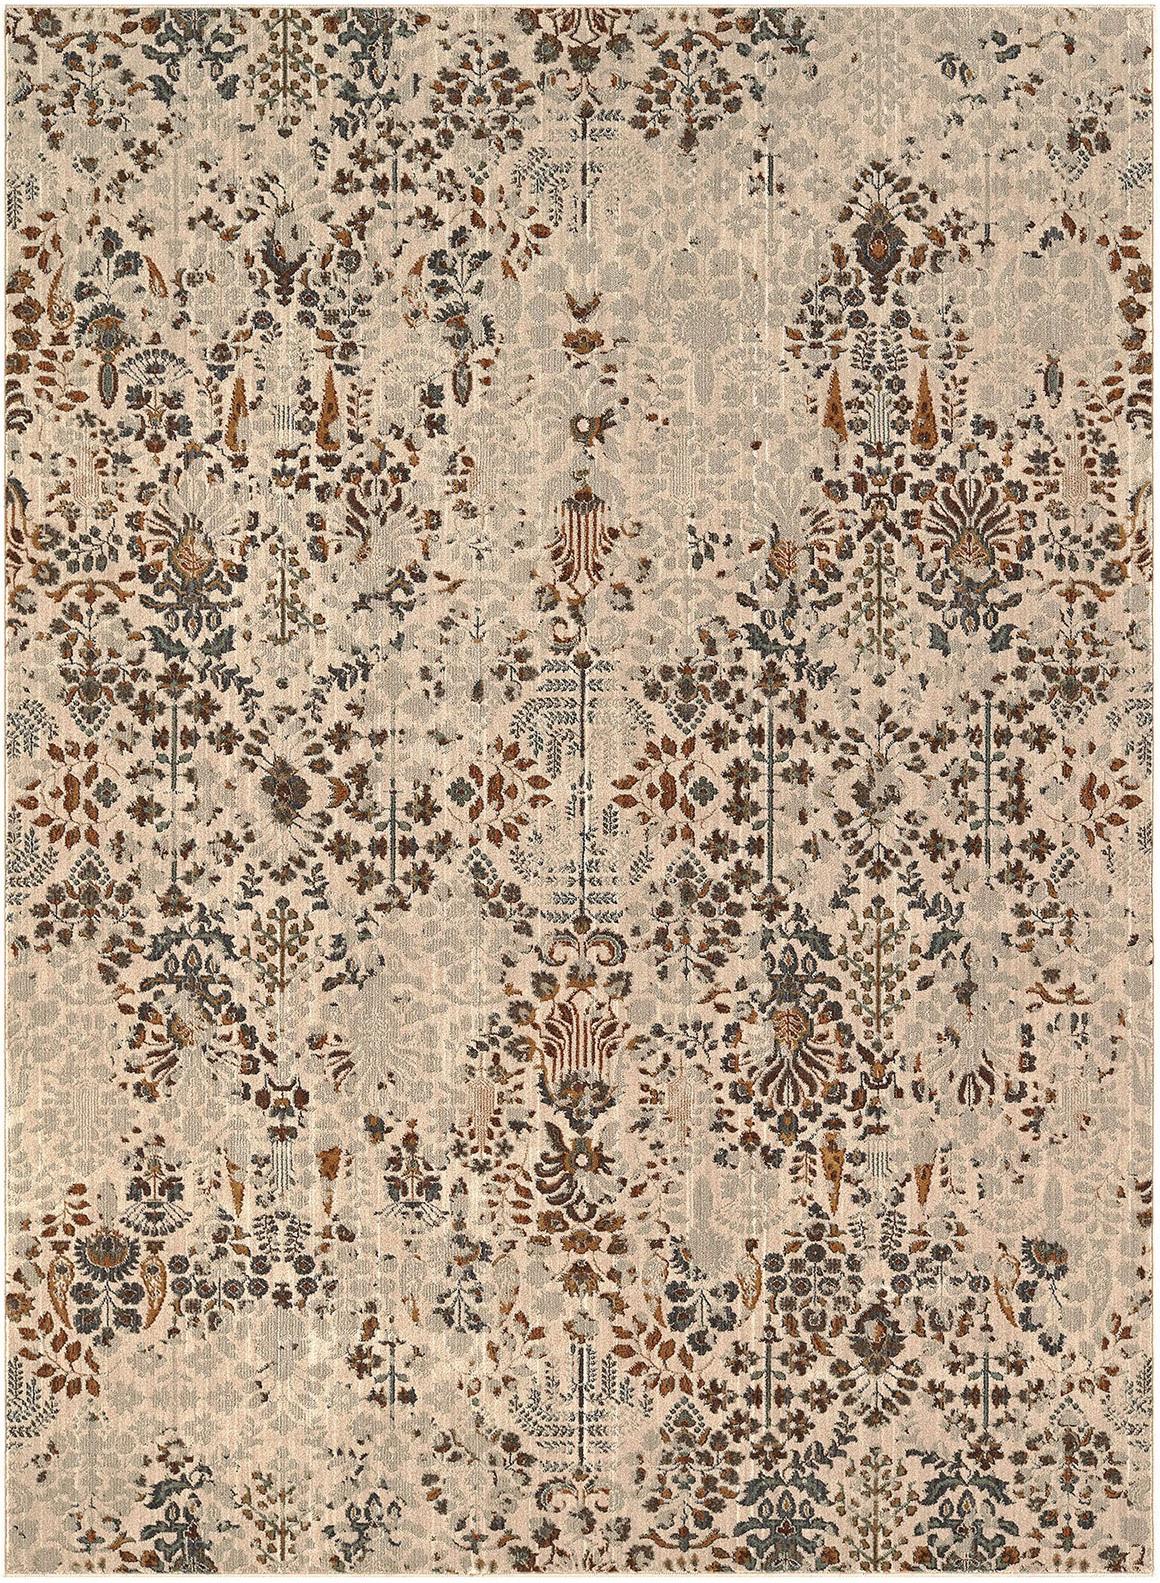 Contemporary Area Rug RG8167-S Wilhelm RG8167-S in Floral 